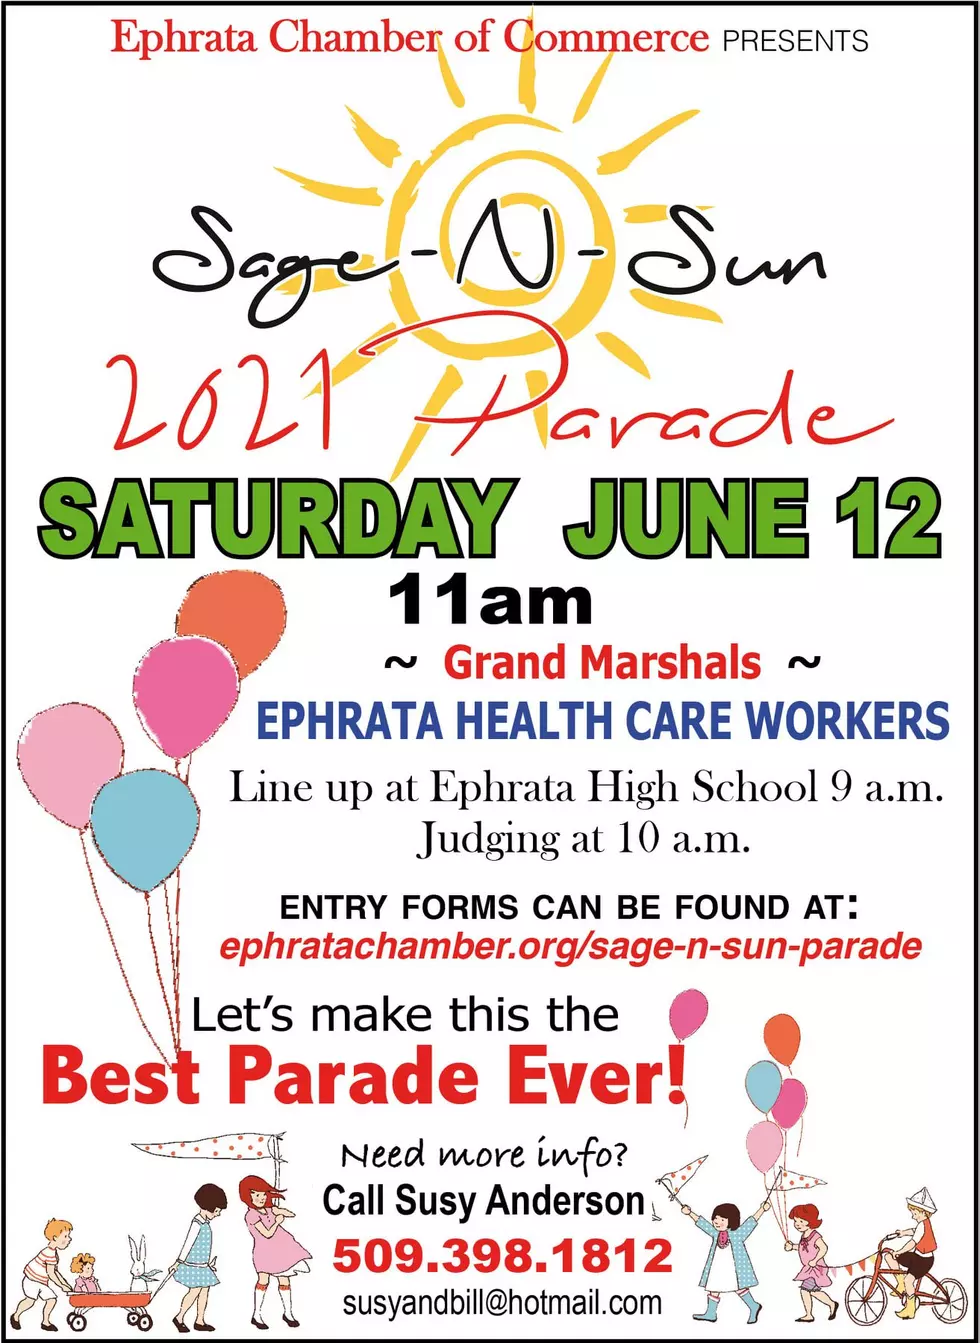 Community Invited to View and Participate in the Ephrata Sage N Sun Parade